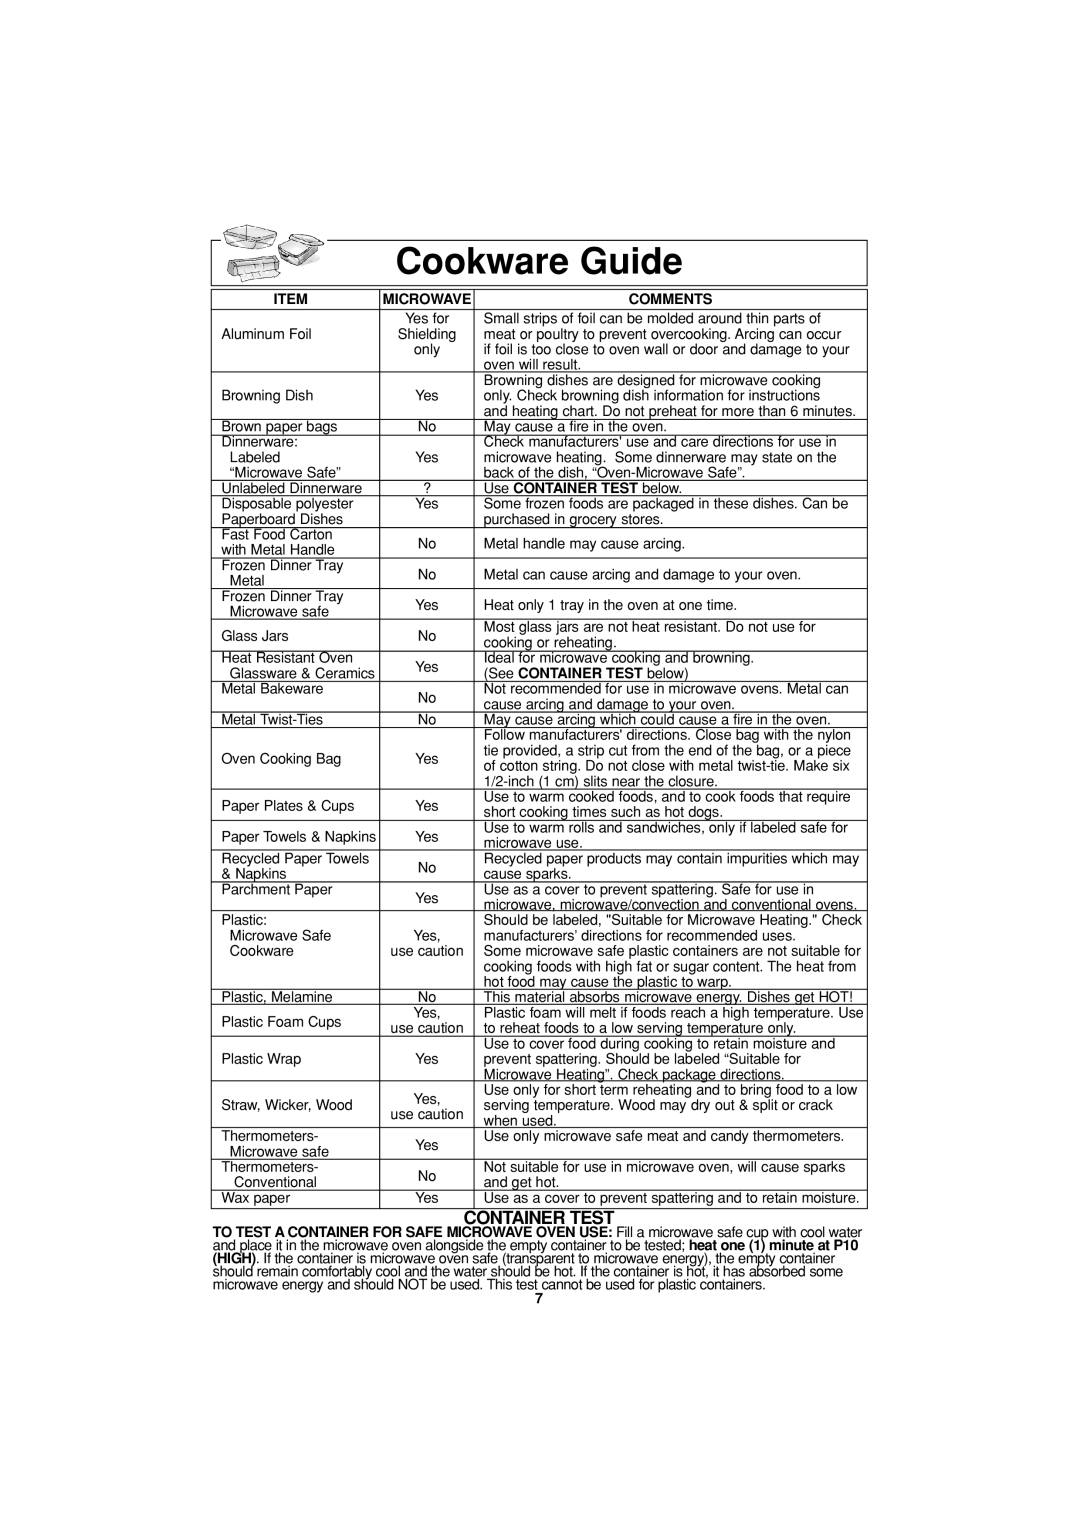 Panasonic NN-S334 important safety instructions Cookware Guide, Container Test 